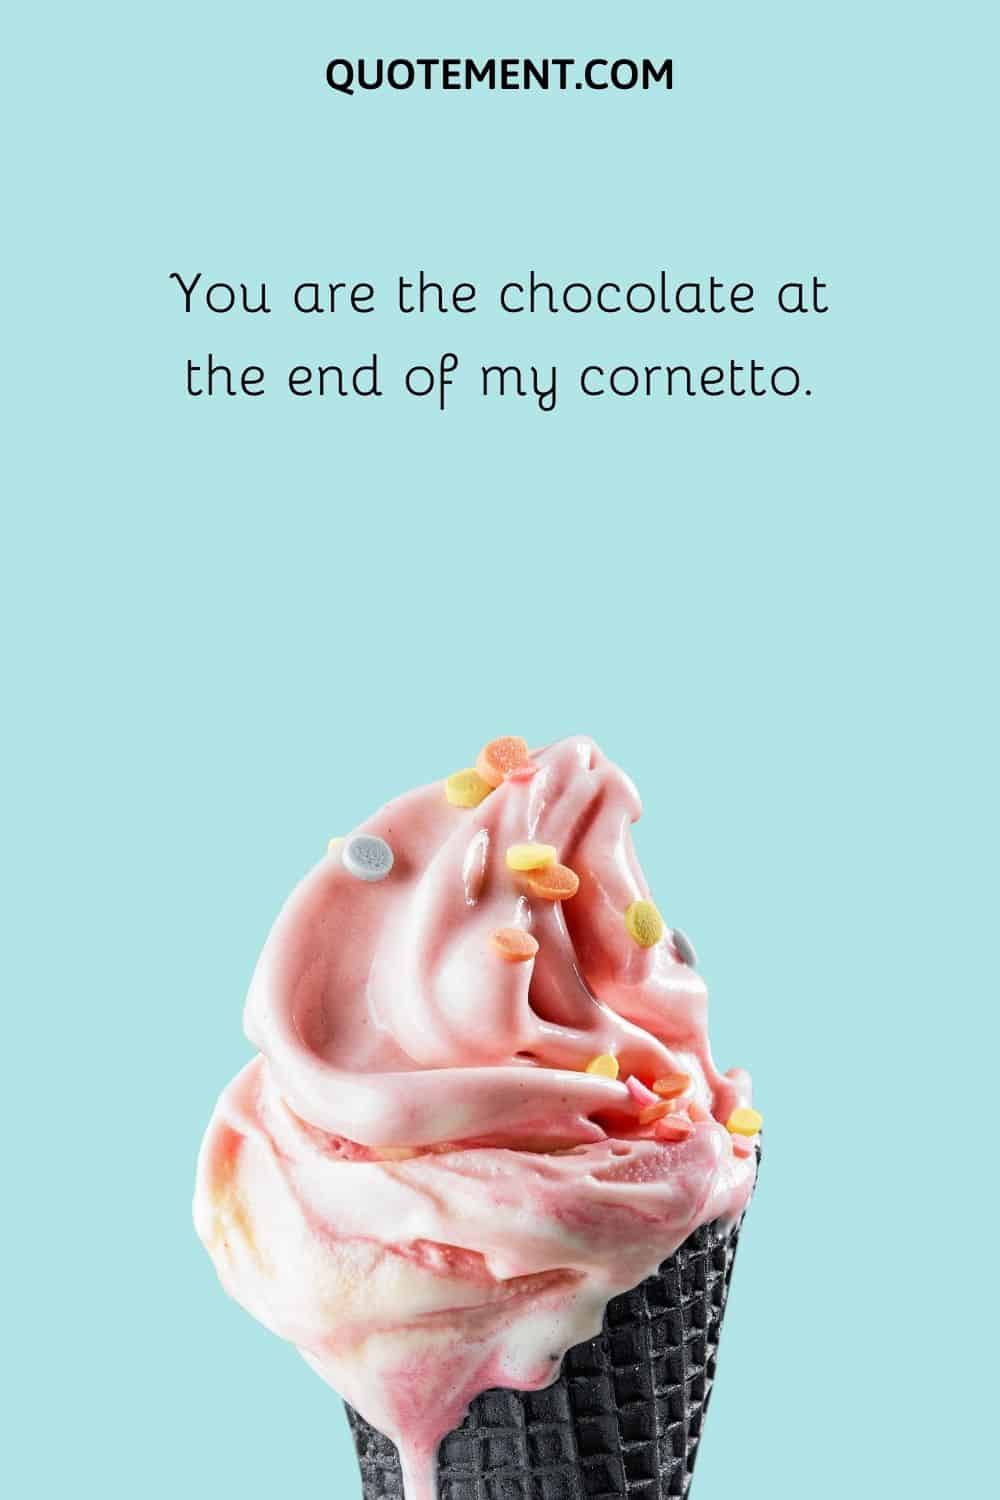 You are the chocolate at the end of my cornetto